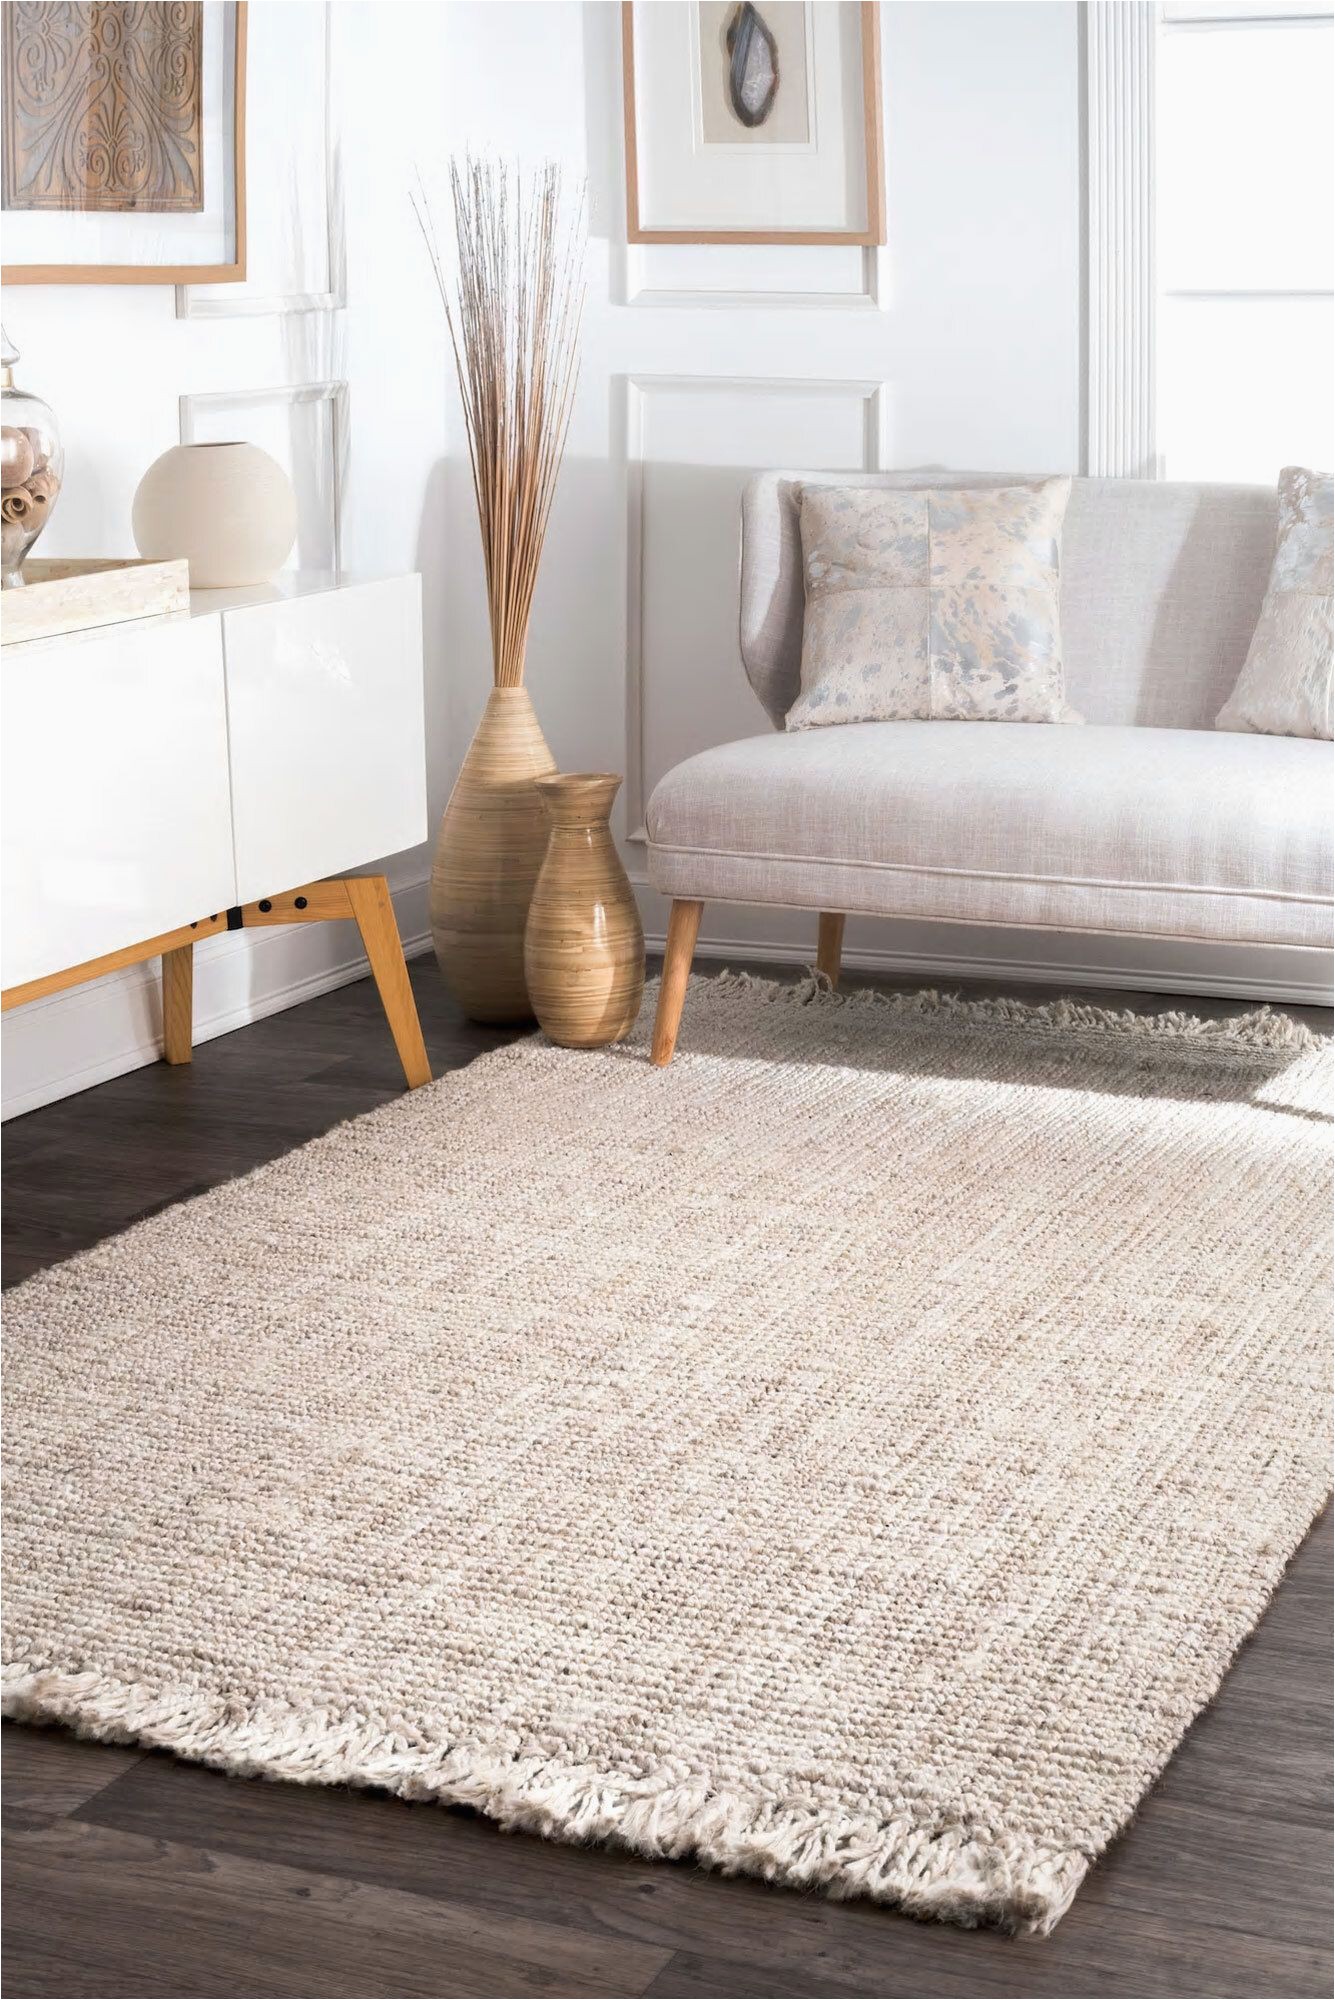 Safavieh Natural Fiber Milica Braided area Rug Our Tan & Ivory Bleach Jute Rugs are Hand Woven & Available